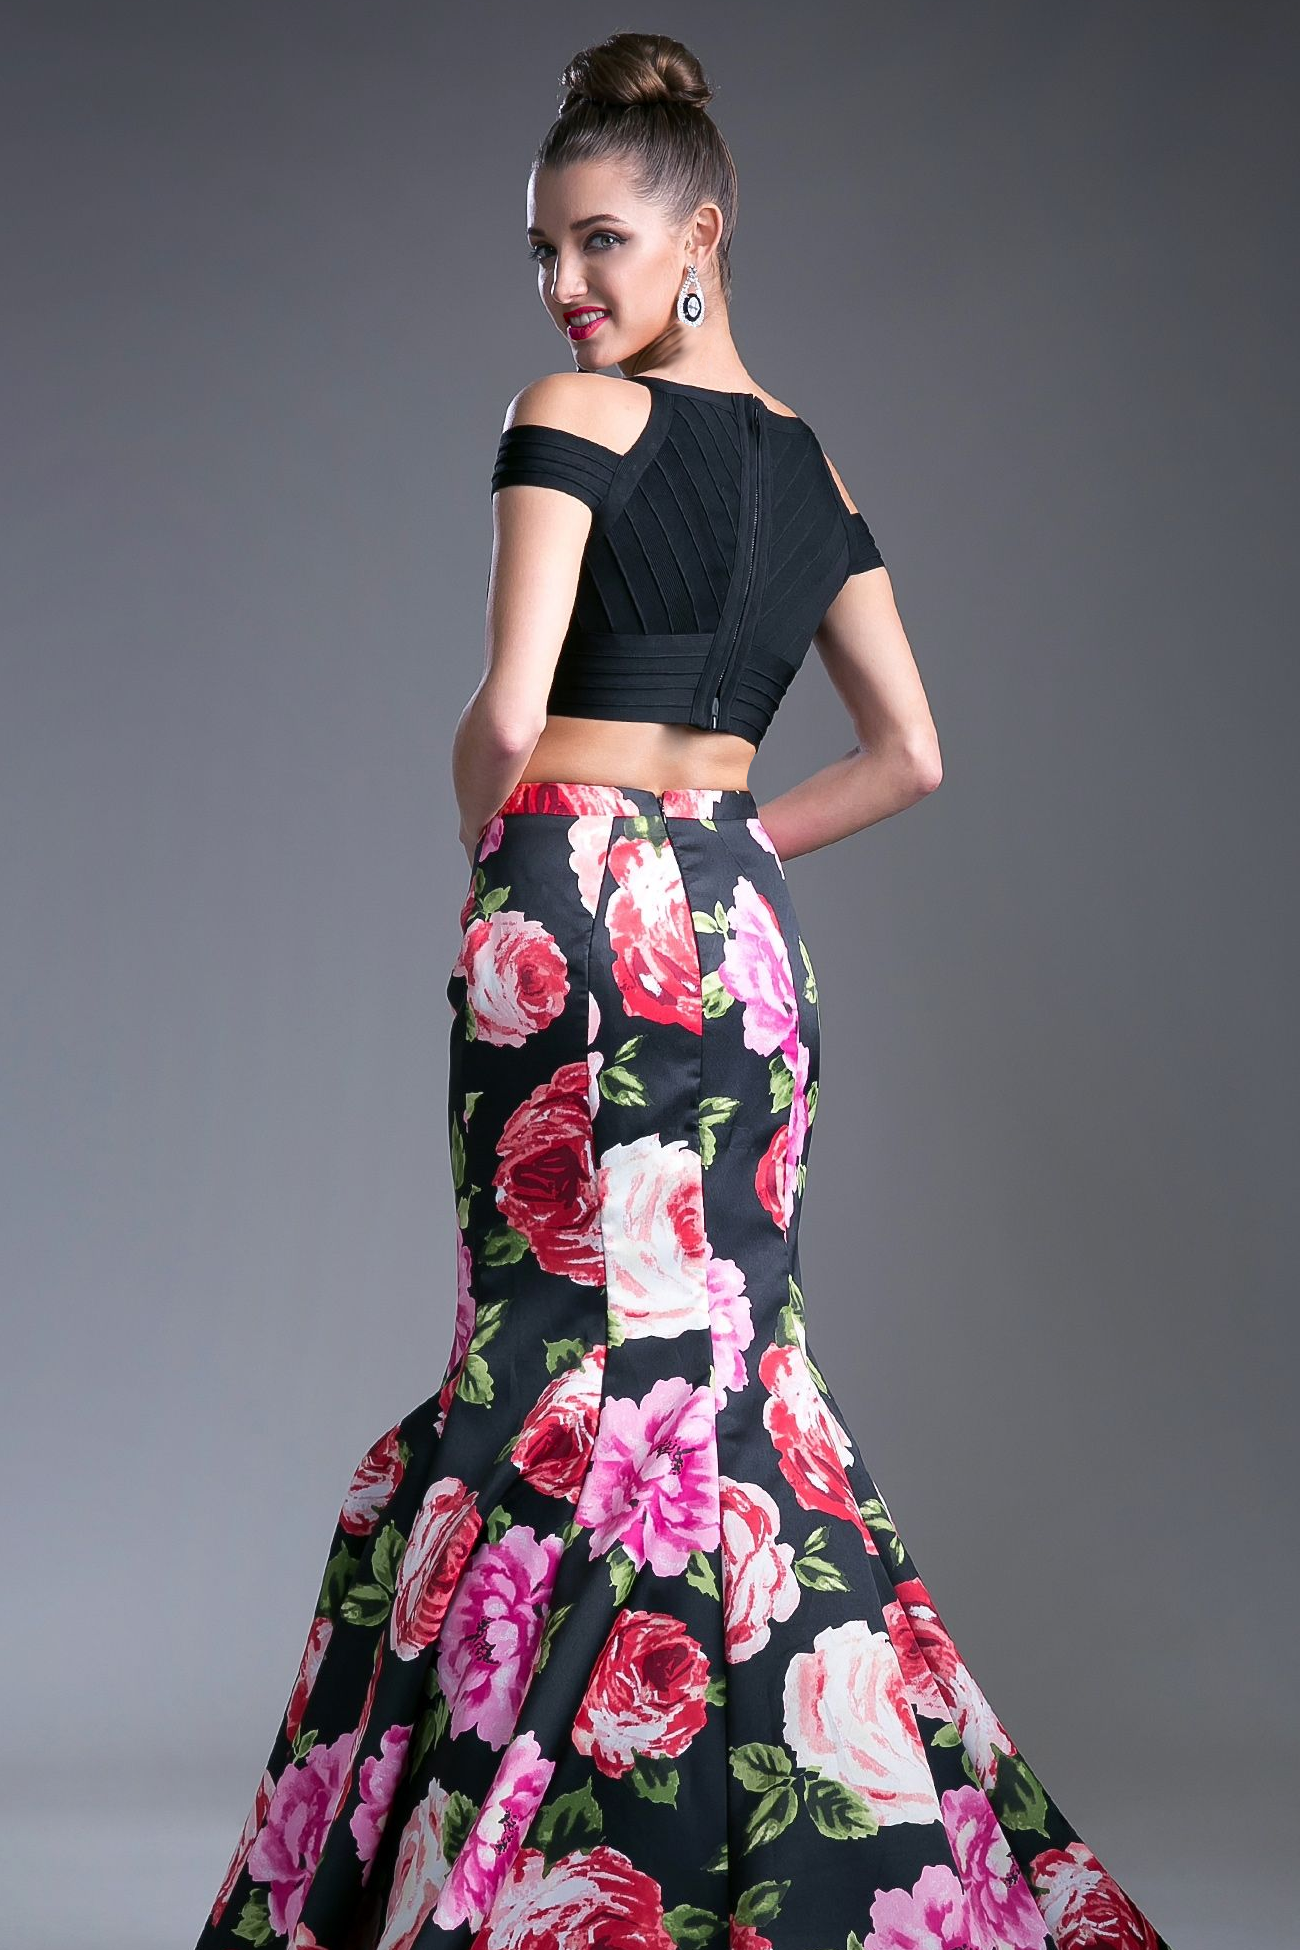 Cap Sleeve Dress with Floral Skirt